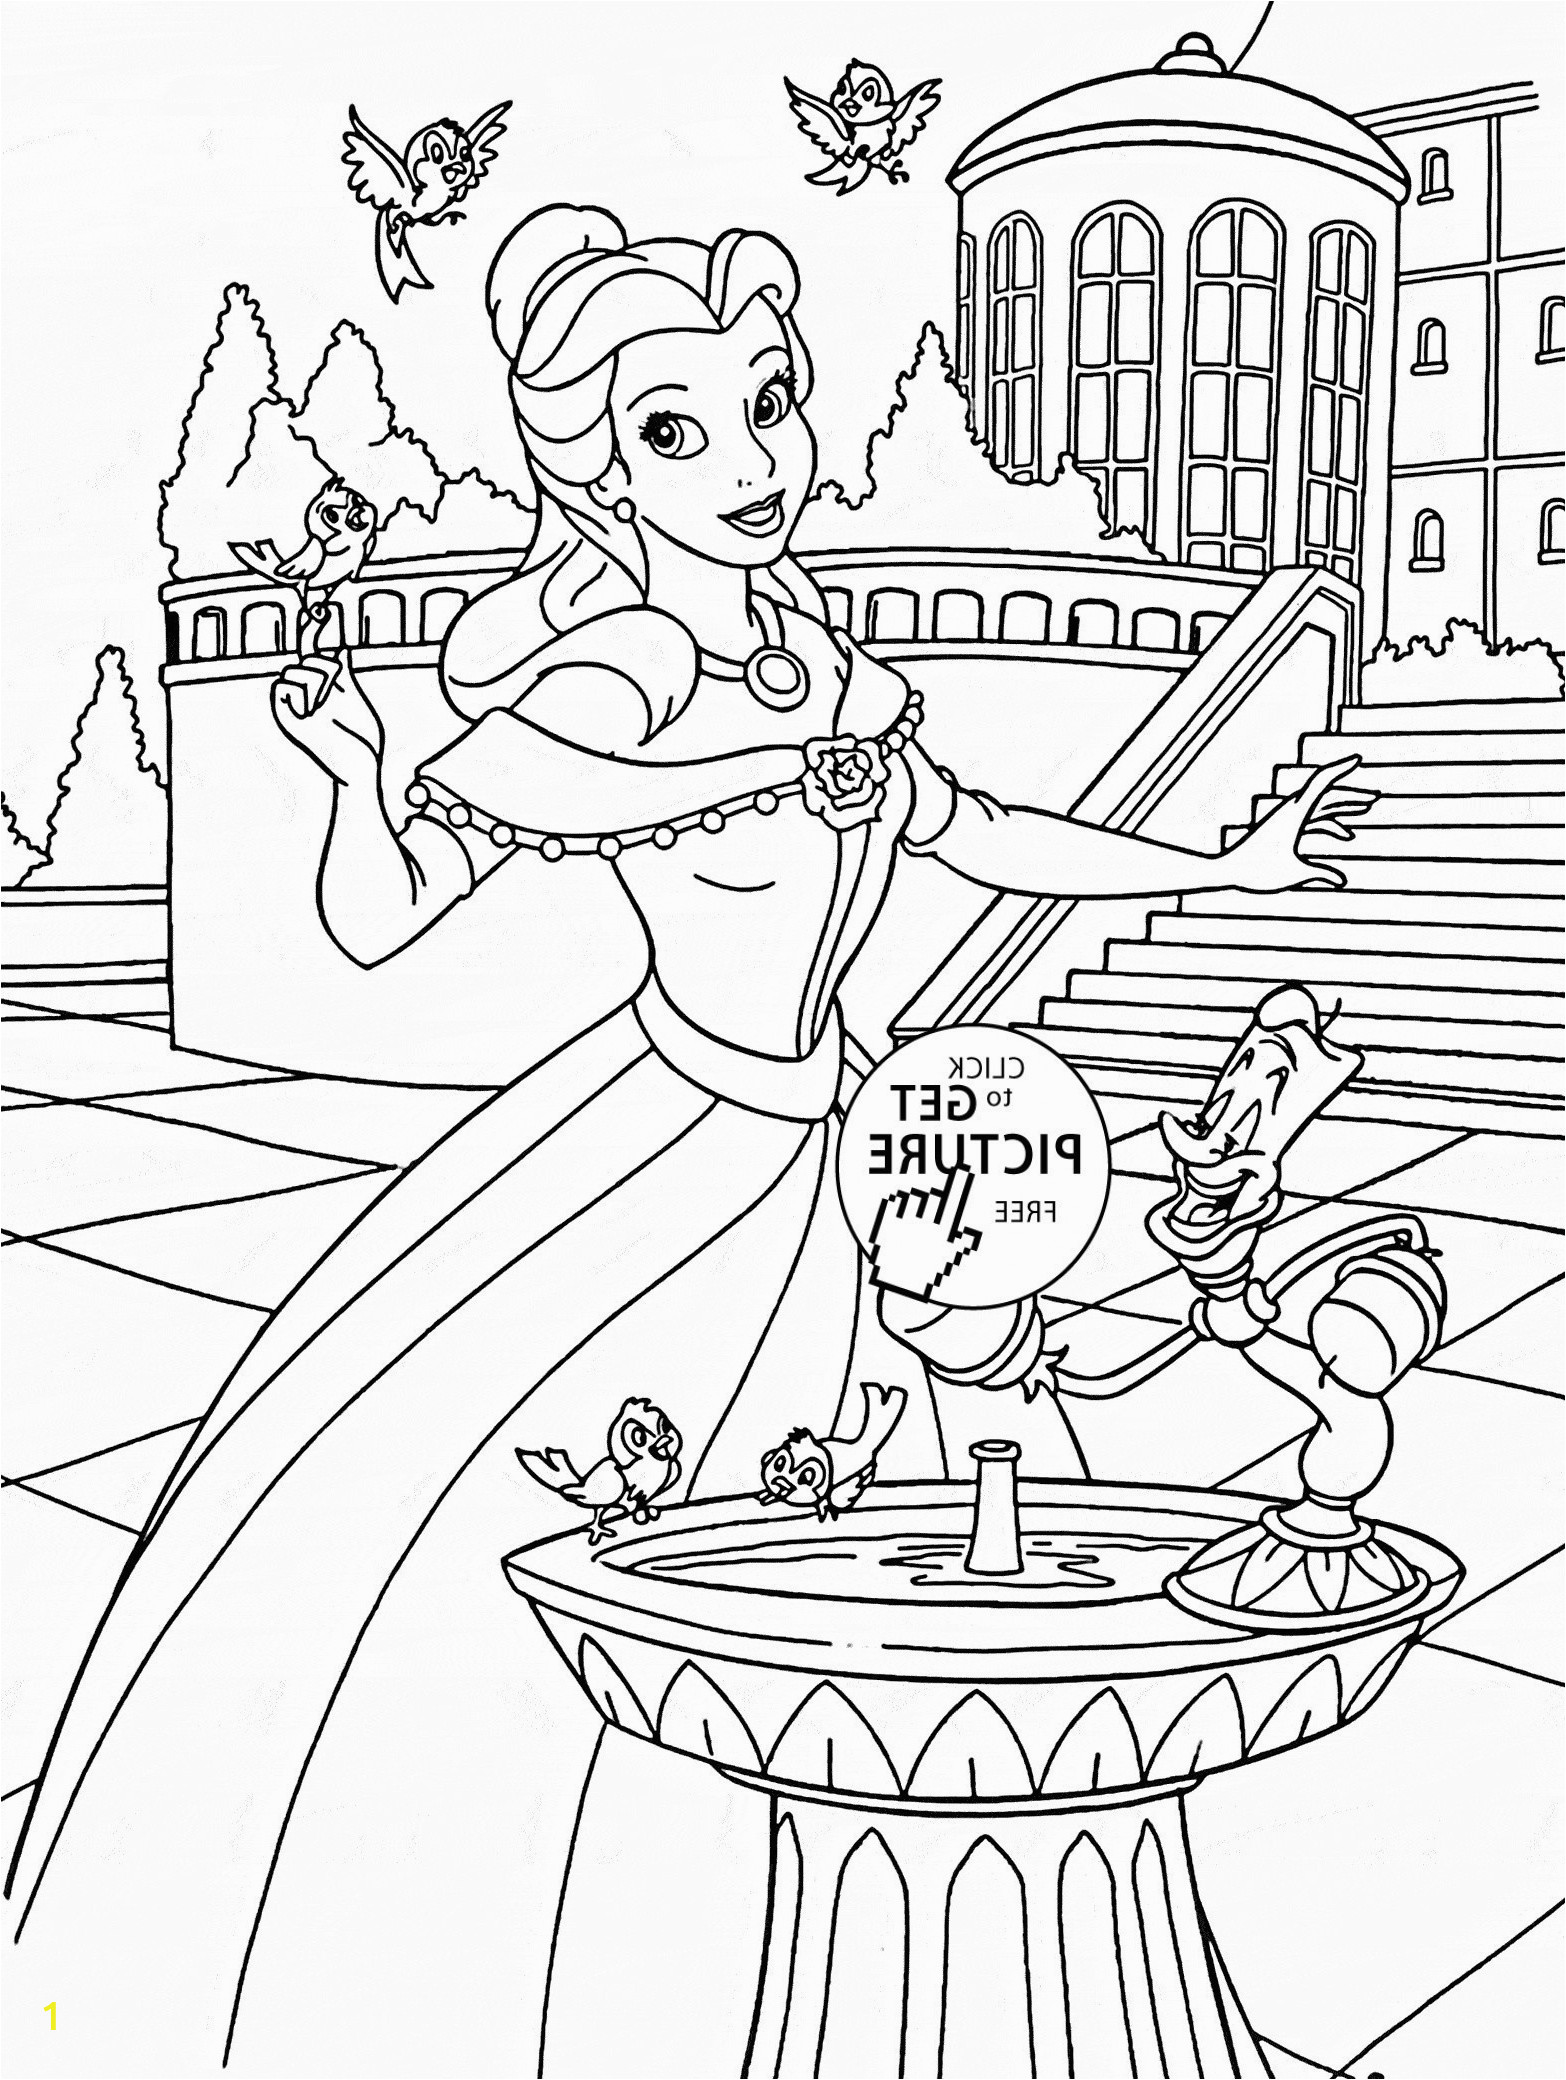 firefighters coloring page inspirational image inspirational monkey kingdom coloring pages thebookisonthetable of firefighters coloring page